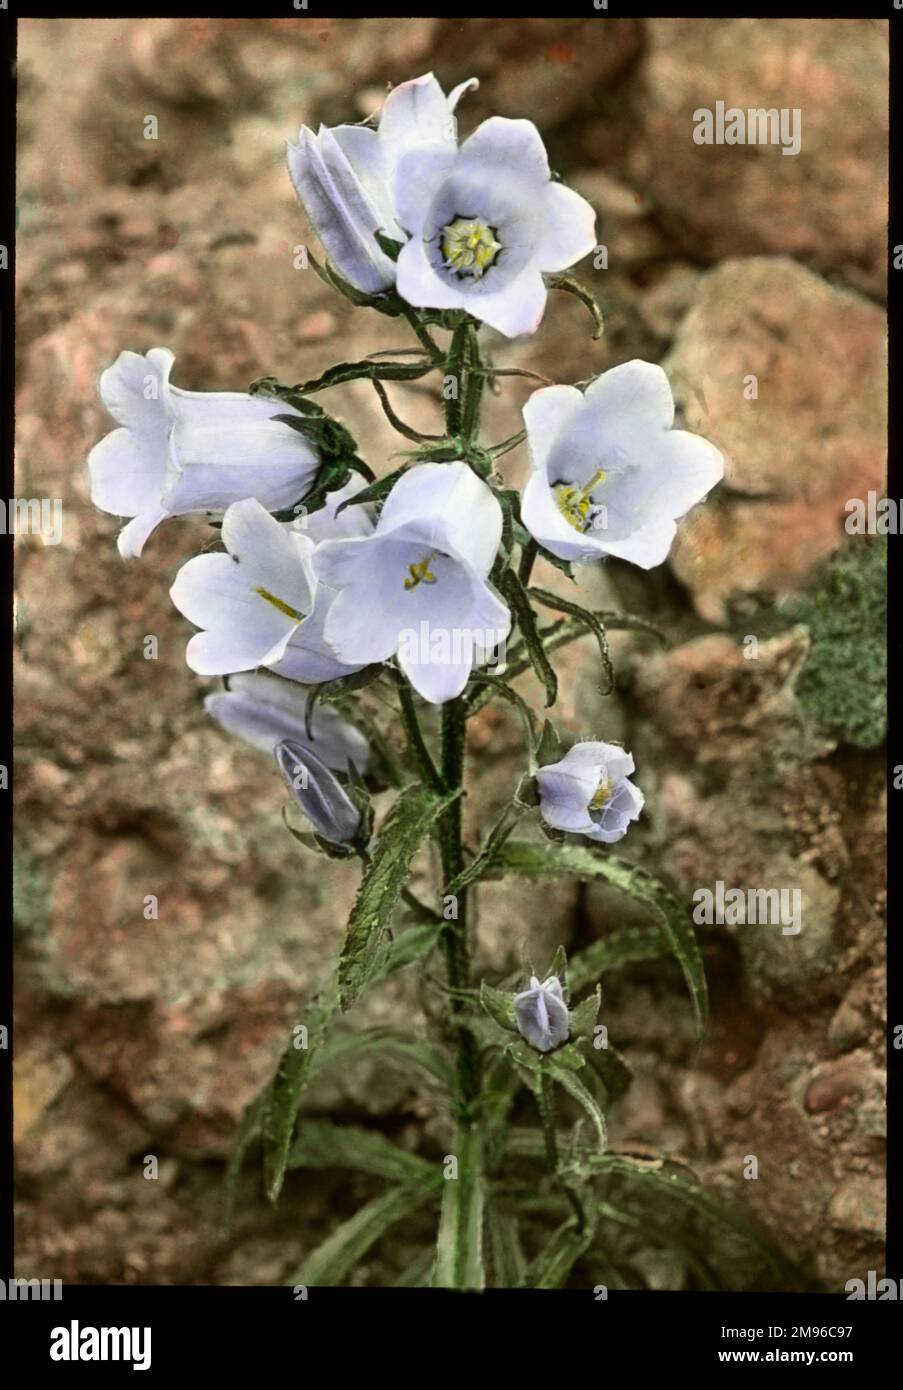 Campanula Speciosa (Pyrenean Bellflower) of the Campanulaceae family.  It often has blue-violet flowers, but is seen here with very pale blue petals. Stock Photo